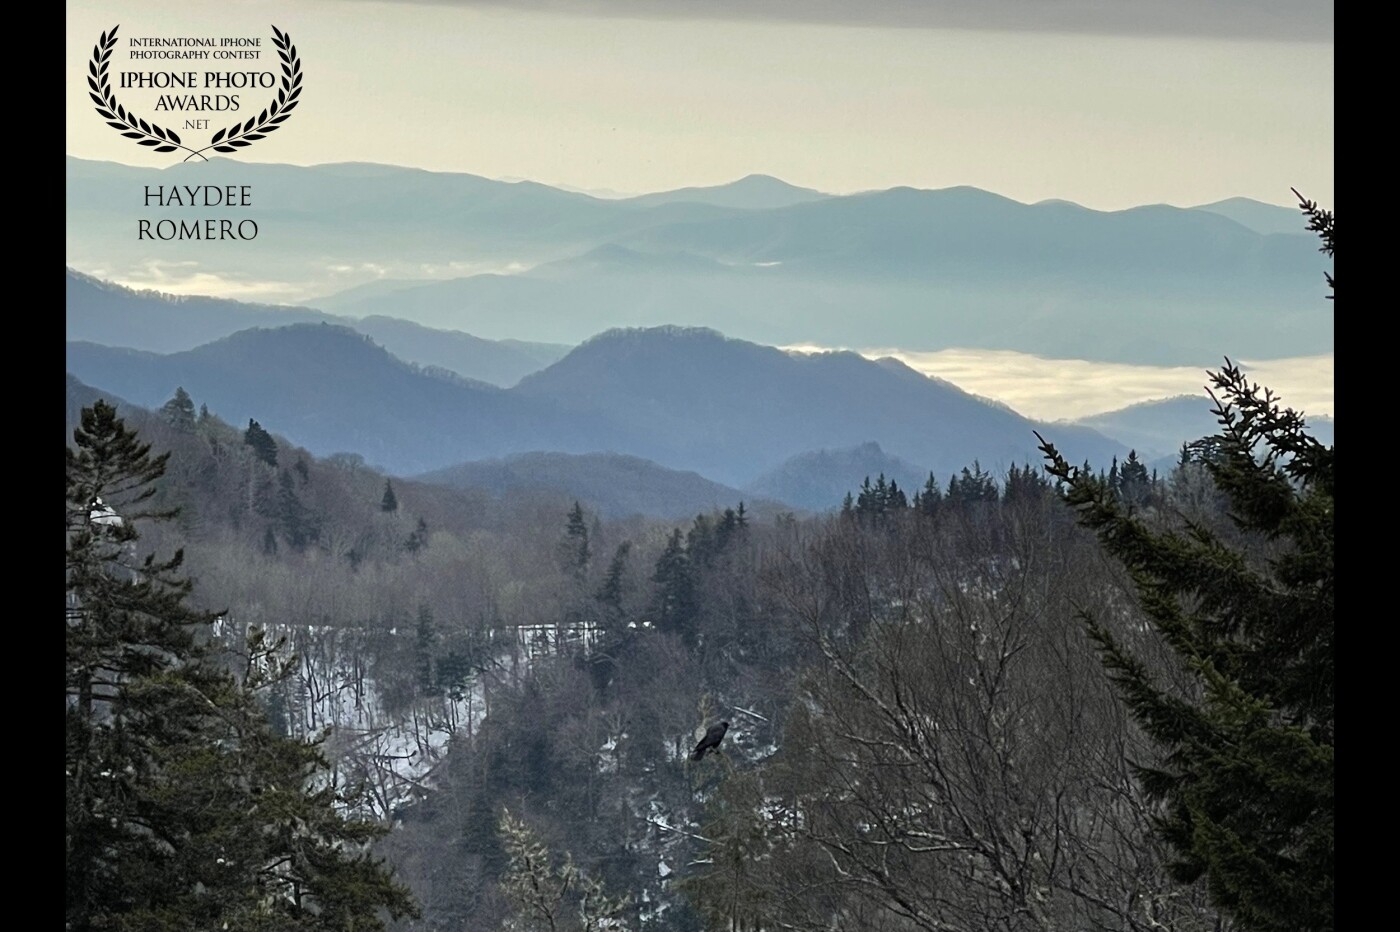 This is a view over the Great Smoky Mountains, which live up to their name in this photo for the blue mist that at times hangs over the peaks and in the valleys. The Cherokee Indians called them Shaconage or "place of the blue smoke". <br />
